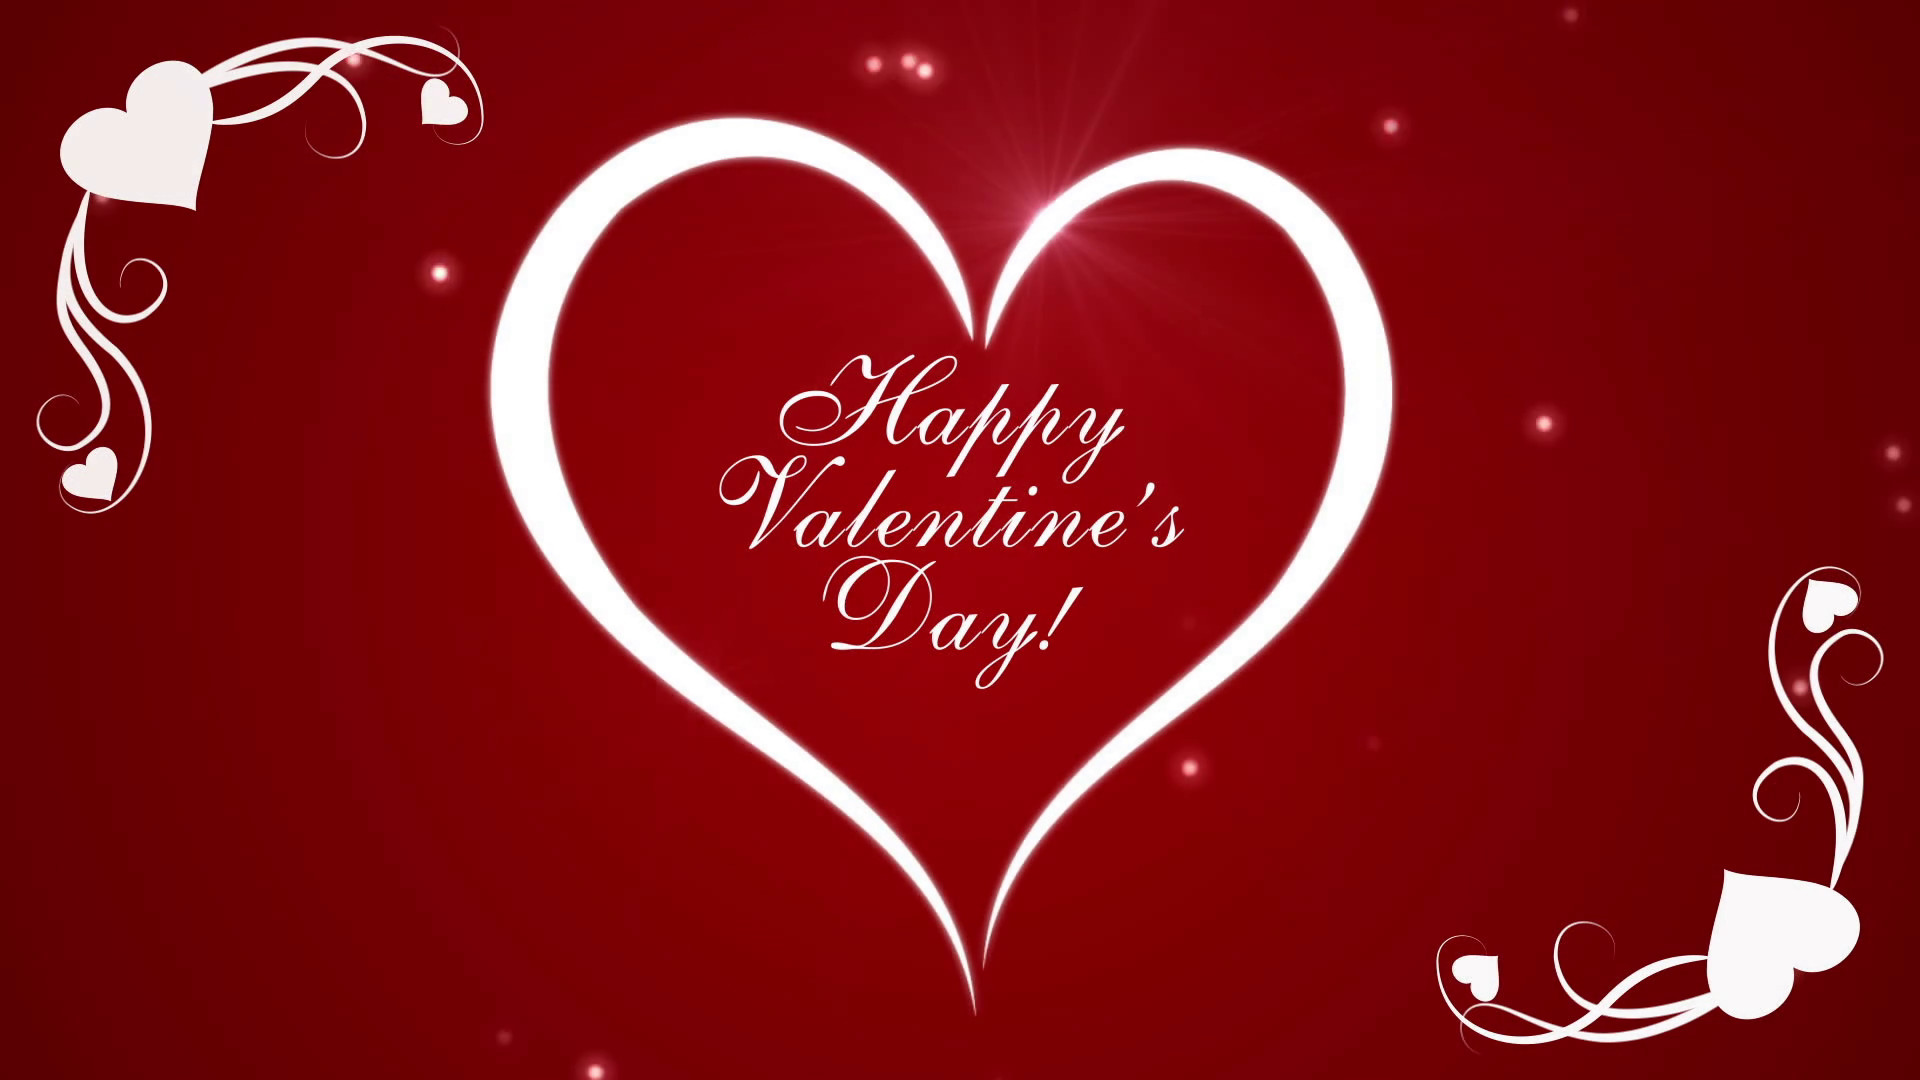 1920x1080 Footage Happy Valentine's Day with hearts on a red background